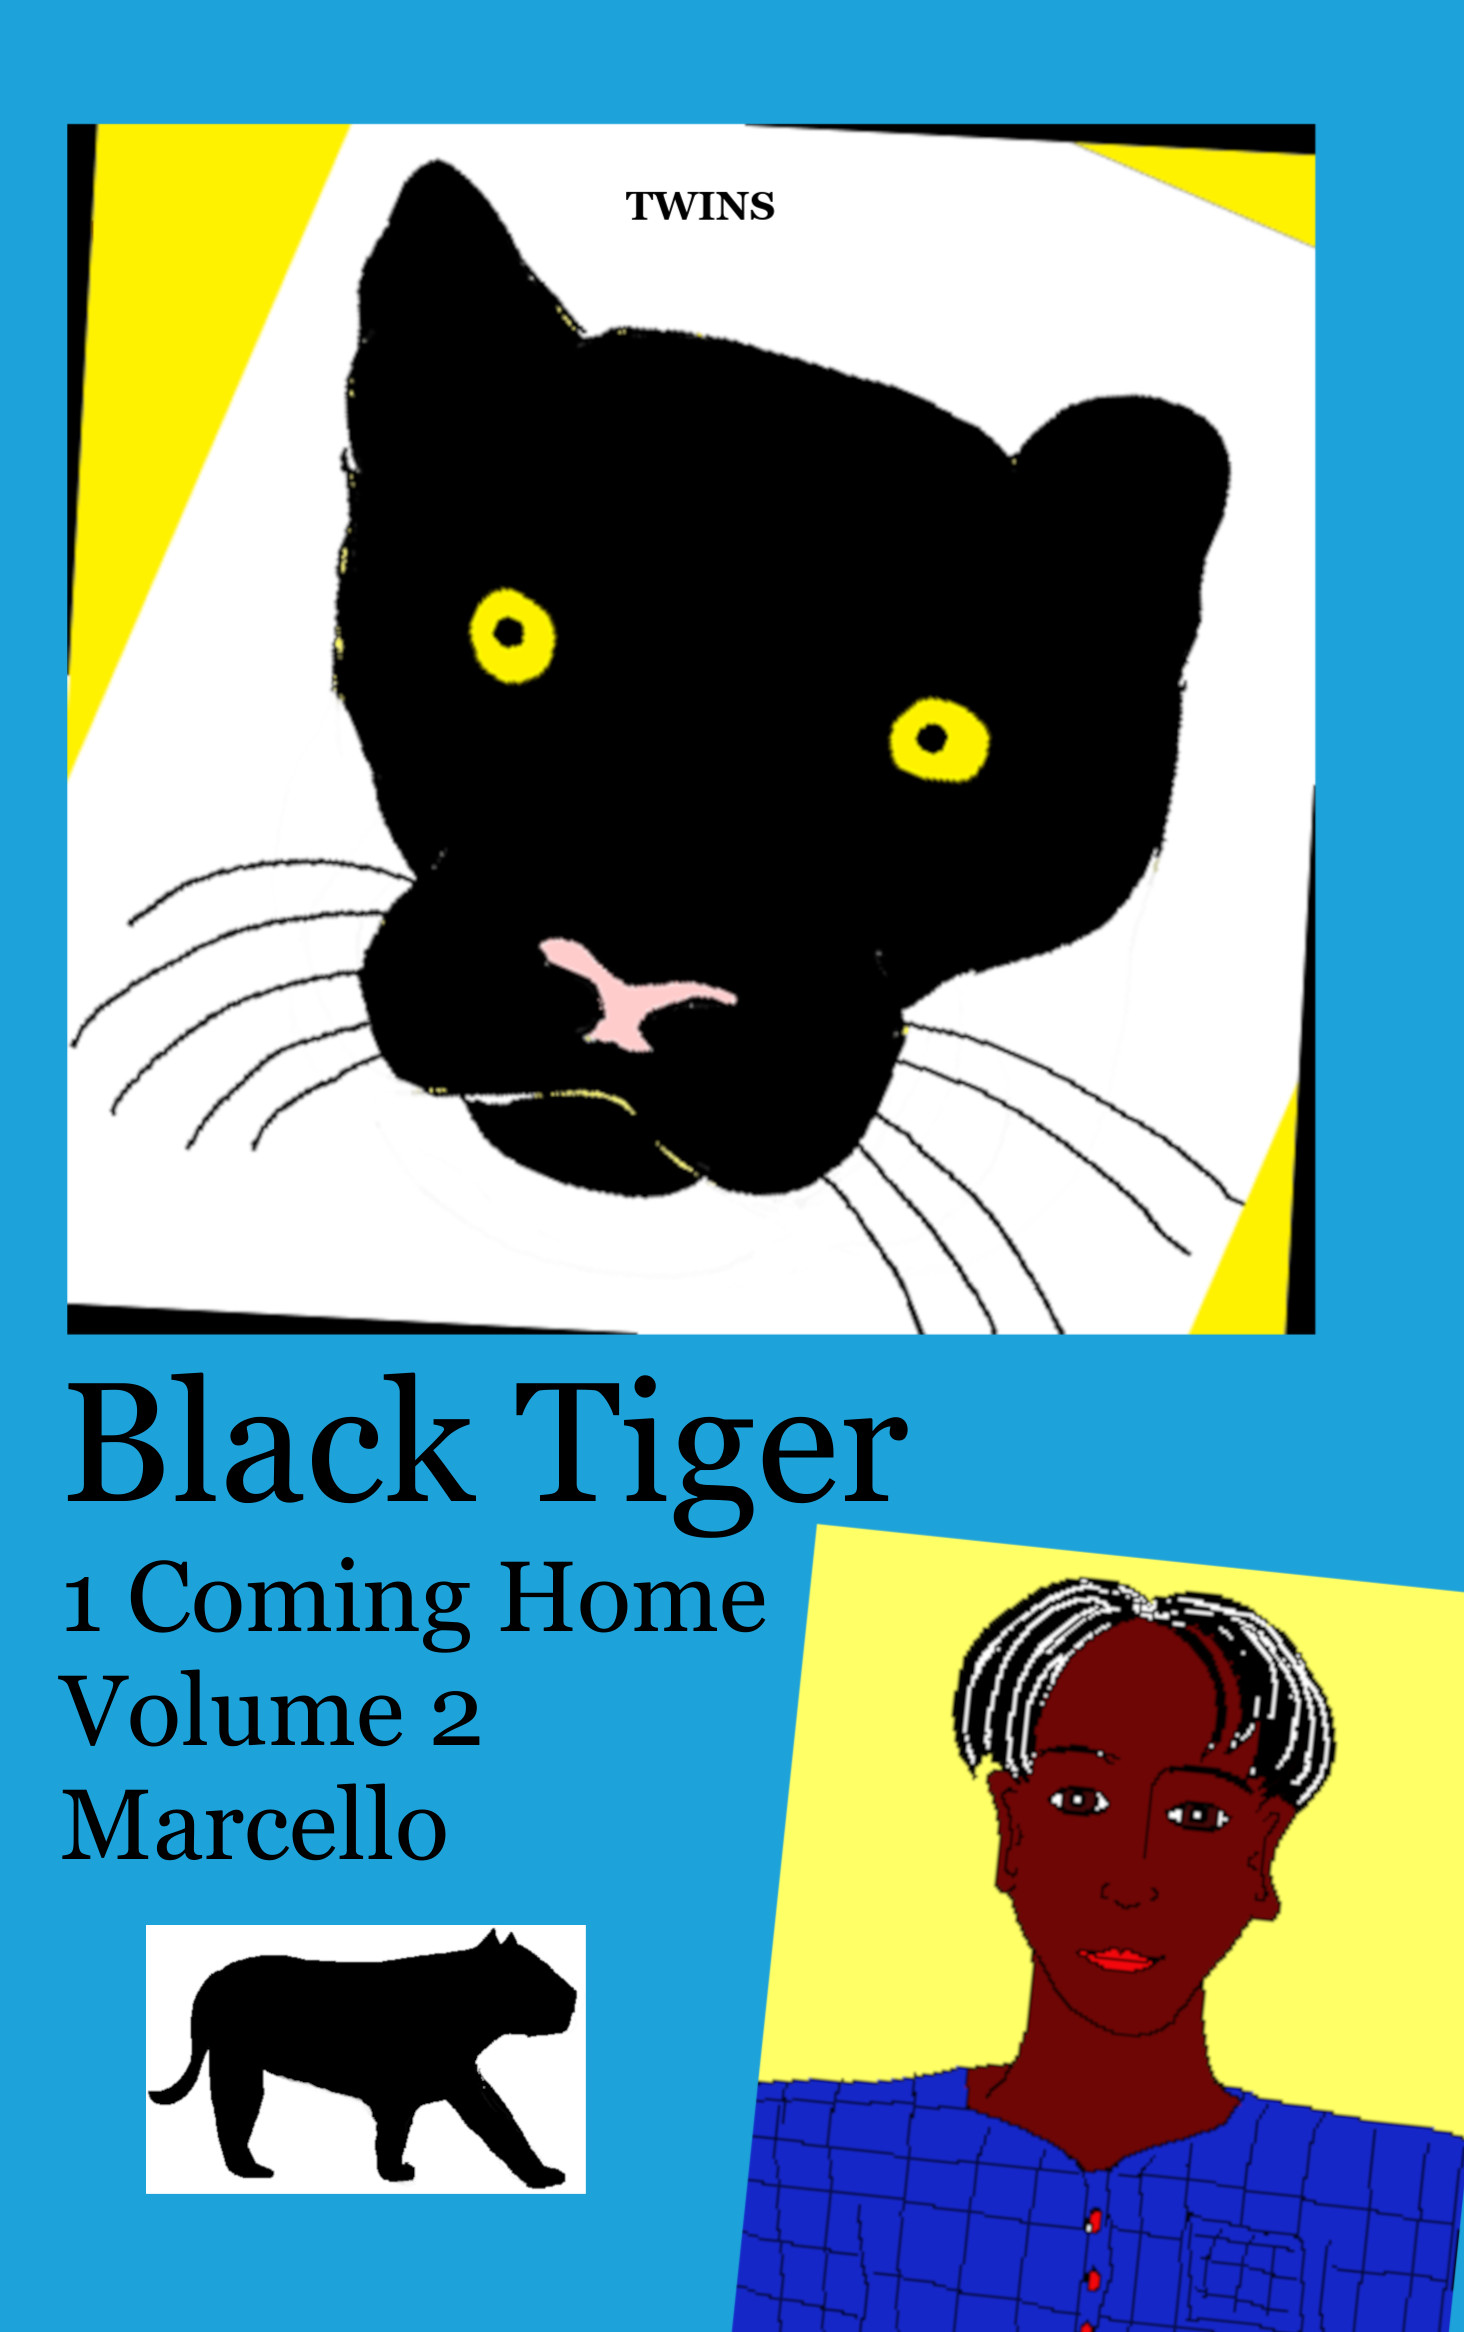 Frontcover Black Tiger Book 1 Coming Home: Volume 2 Marcello by TWINS